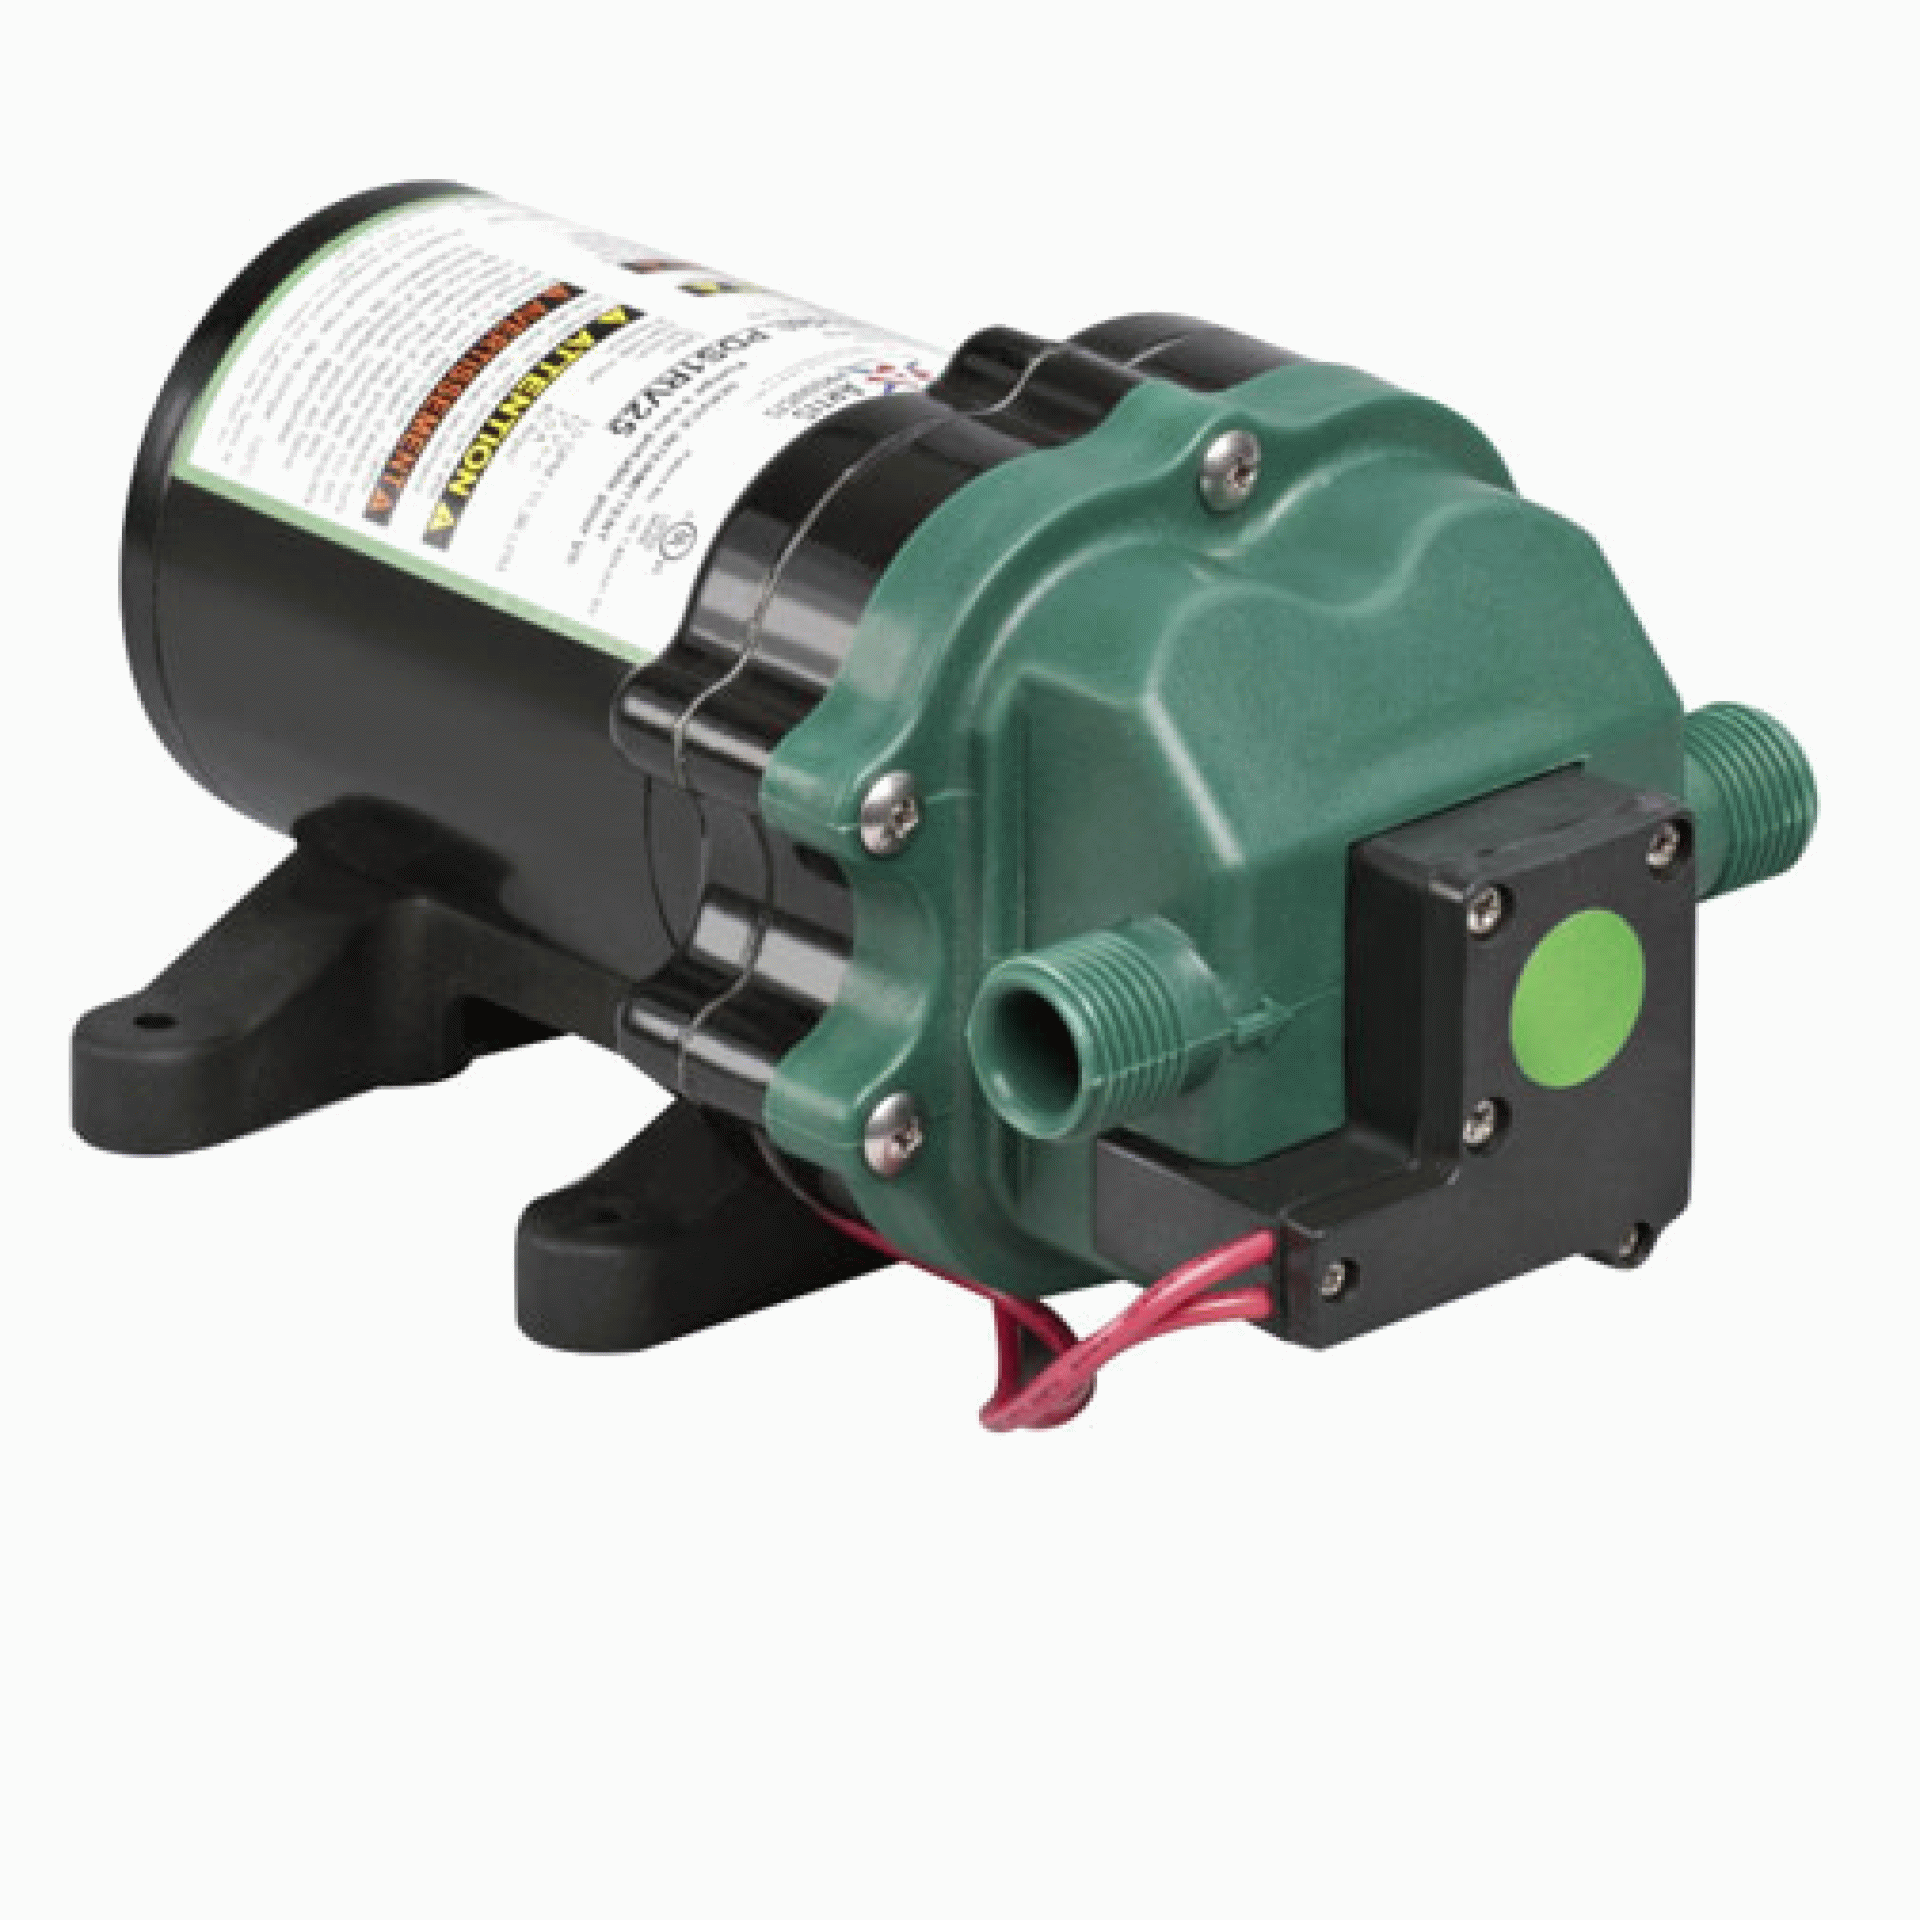 WFCO | PDS1RV25 | POWER DRIVE SERIES ONE RV PUMP 3.0 GPM MAX 7.0 AMP MAX 40 PSI